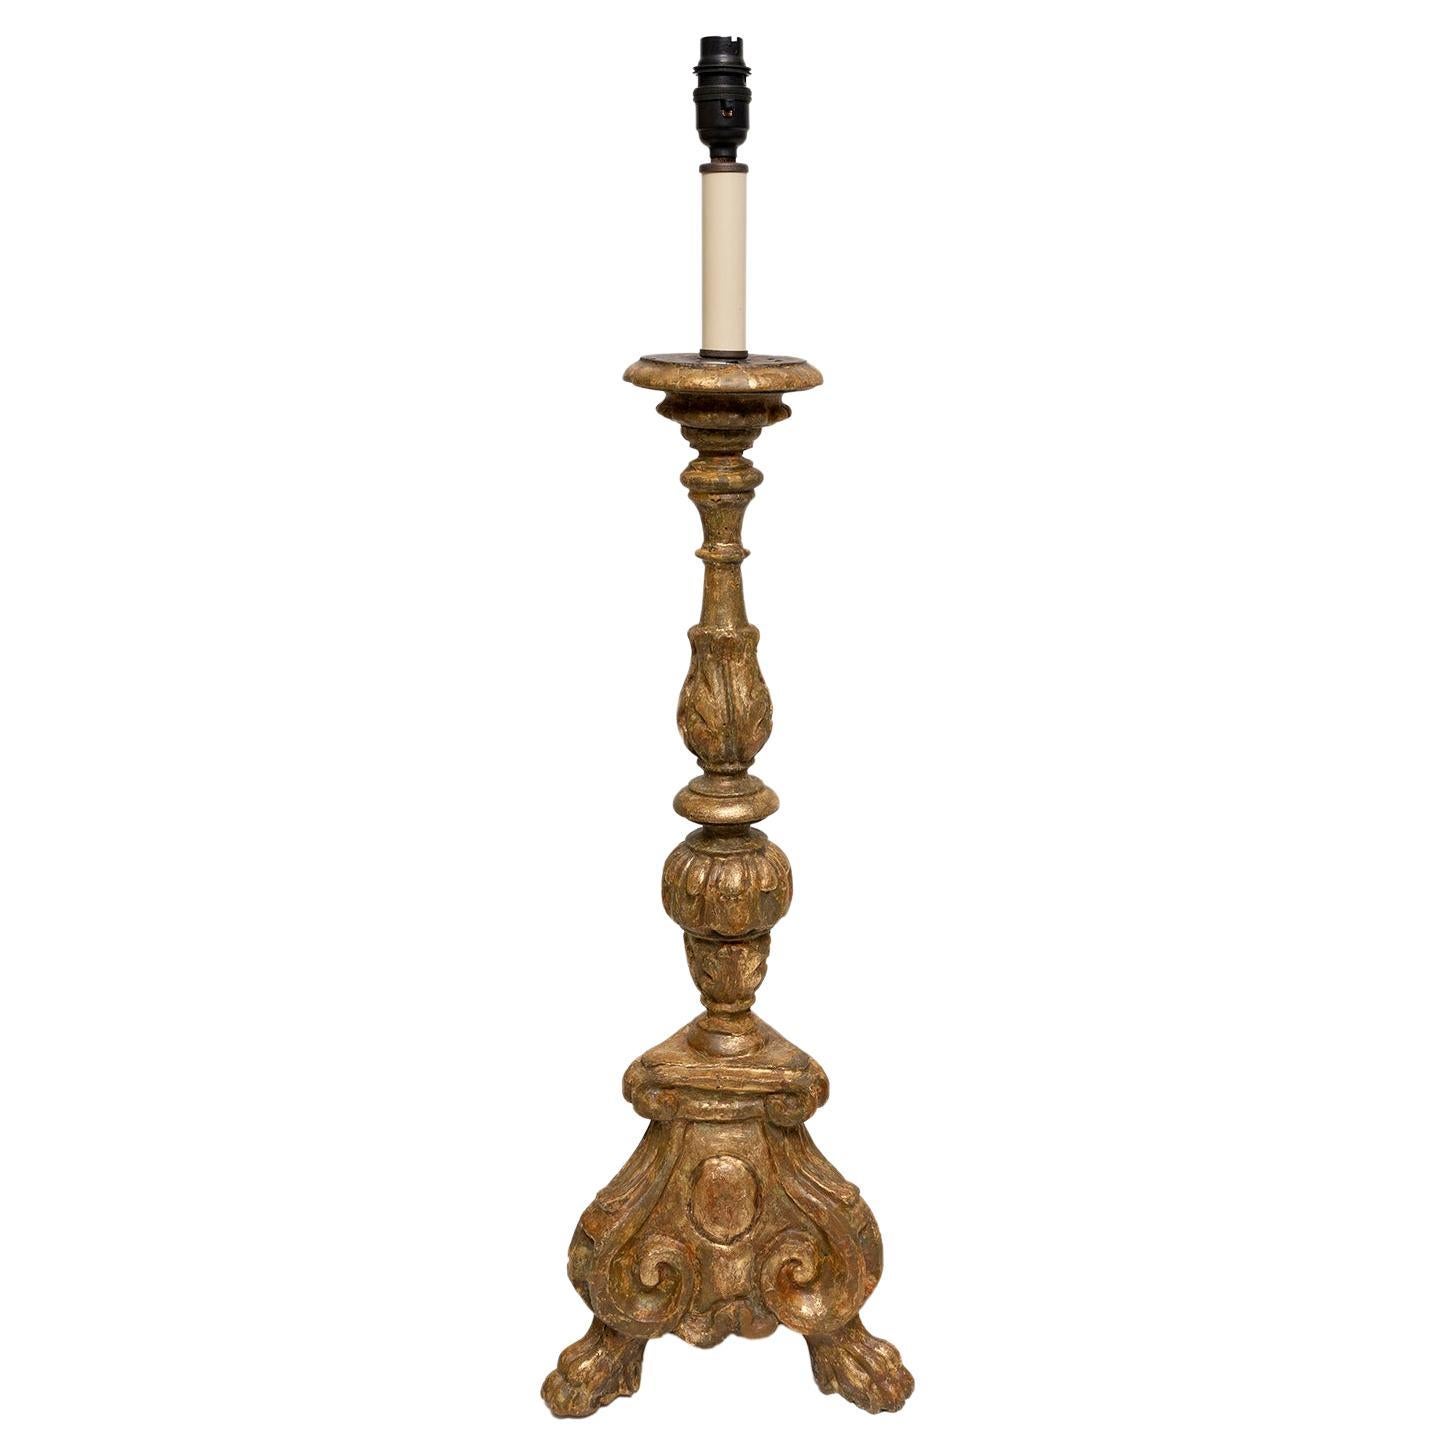 Table Lamp Candlestick Gilded 18th Century Baroque Italian 81cm 32" high For Sale